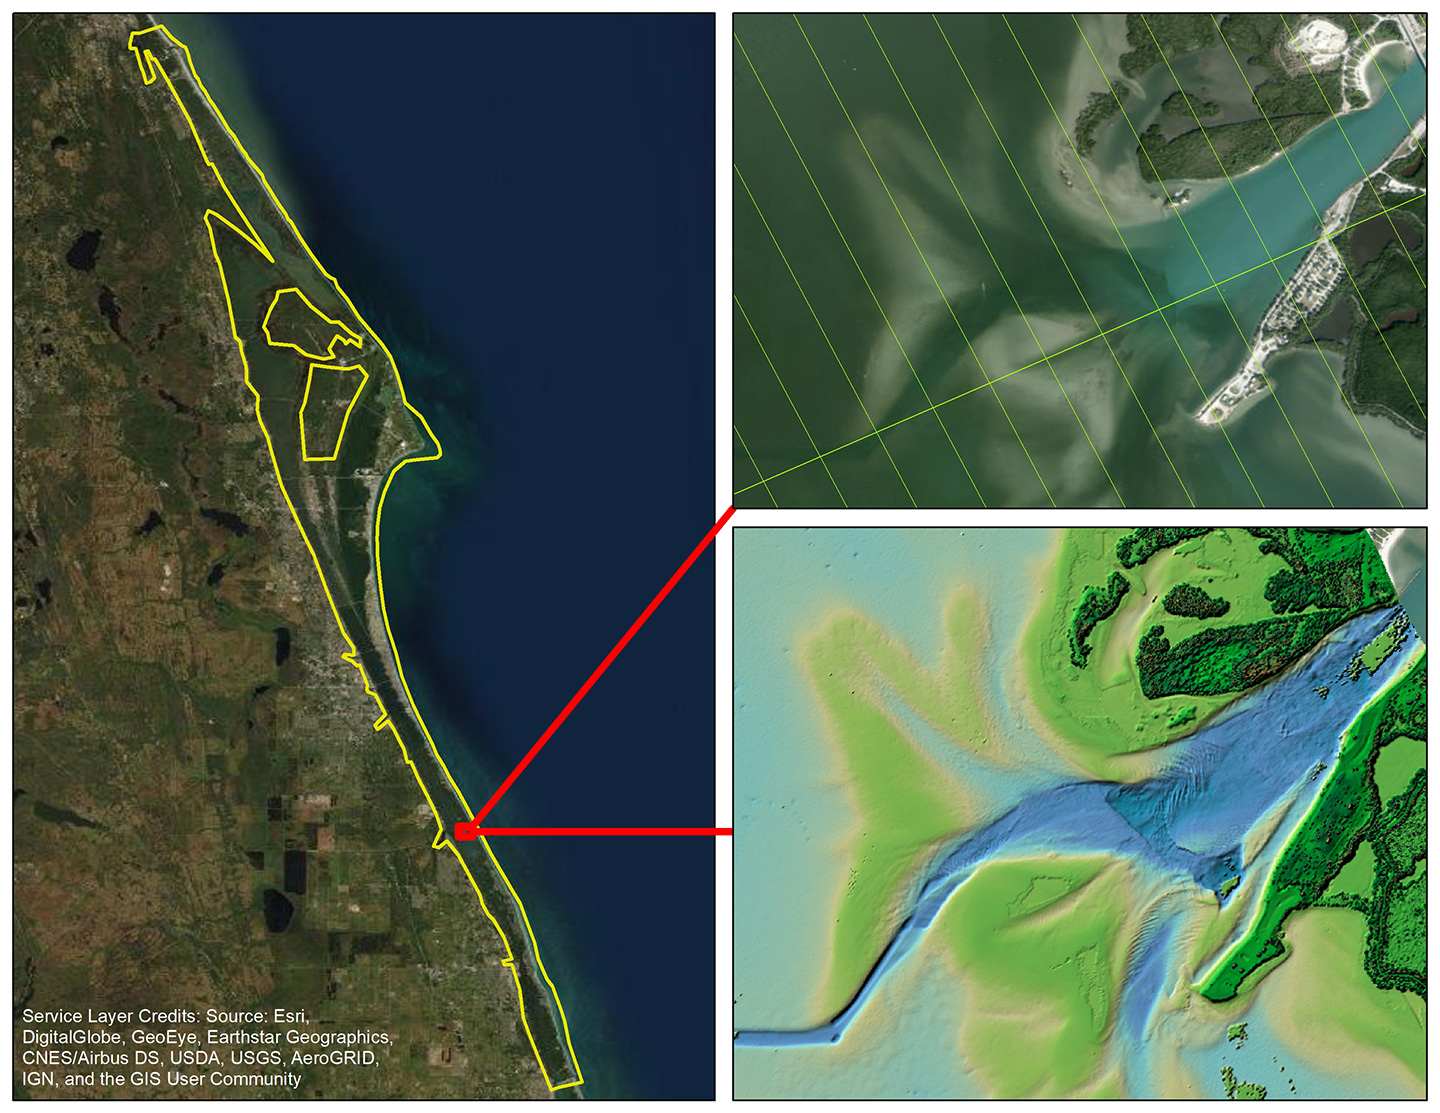 Dewberry is acquiring 600+ square miles of topobathymetric lidar data and high-resolution aerial imagery for shoreline mapping along the Atlantic Coast of Florida, extending from New Smyrna Beach to Fort Pierce.